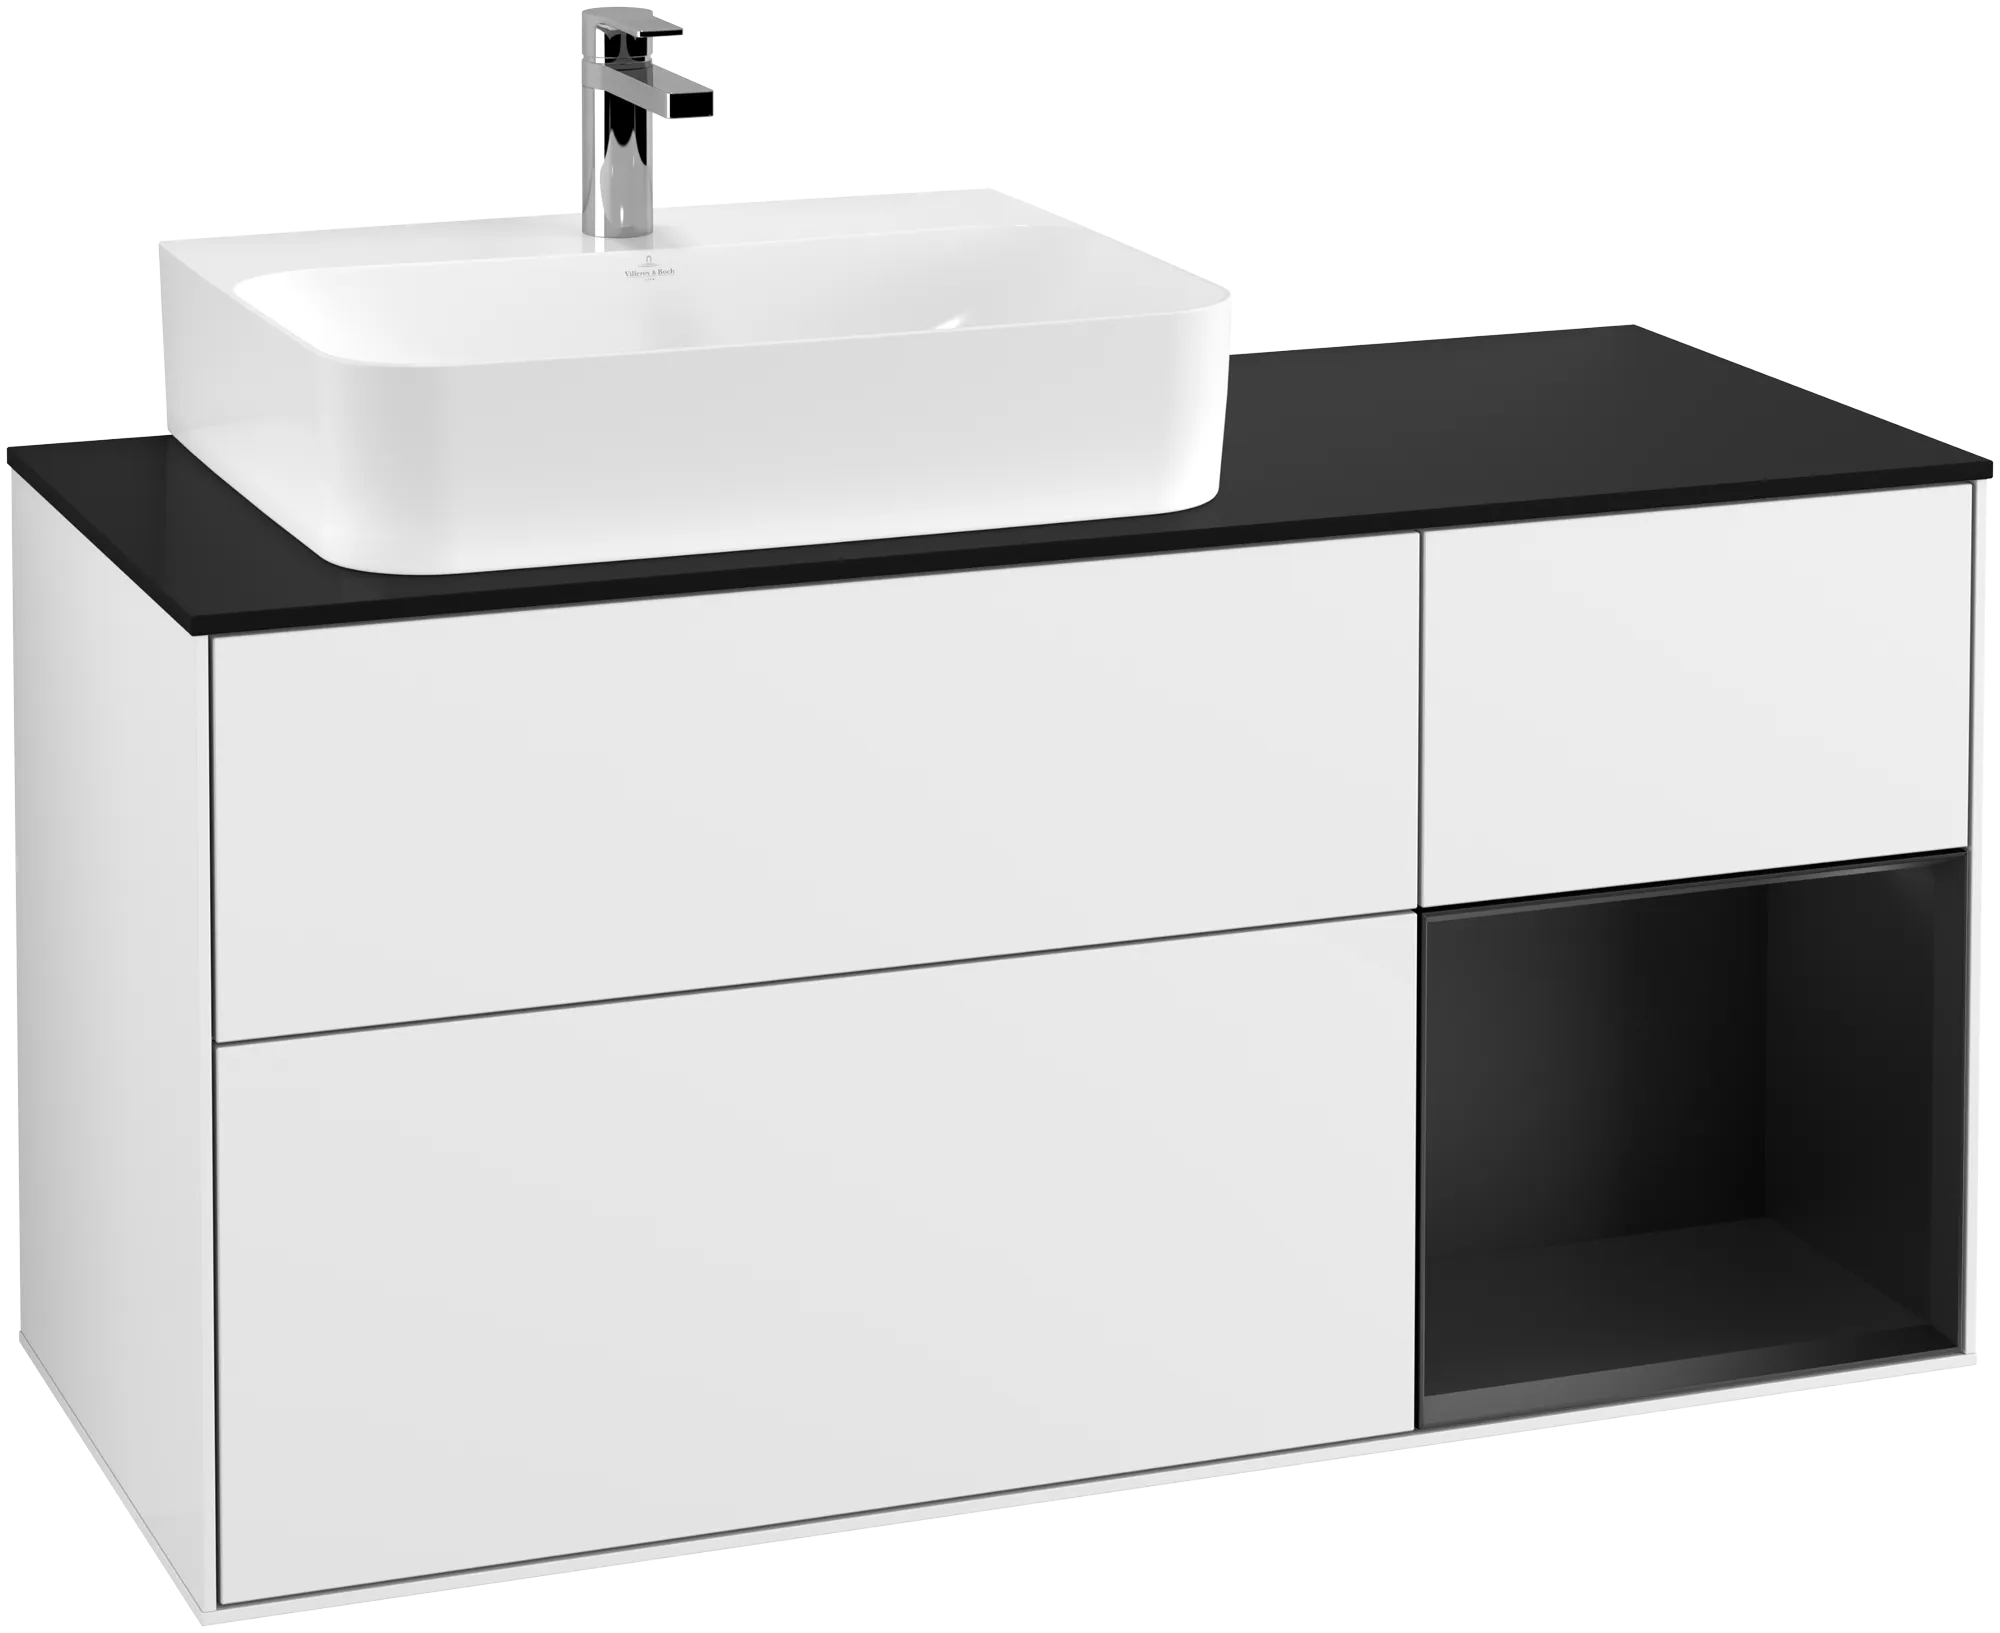 Picture of VILLEROY BOCH Finion Vanity unit, with lighting, 3 pull-out compartments, 1200 x 603 x 501 mm, Glossy White Lacquer / Black Matt Lacquer / Glass Black Matt #G152PDGF